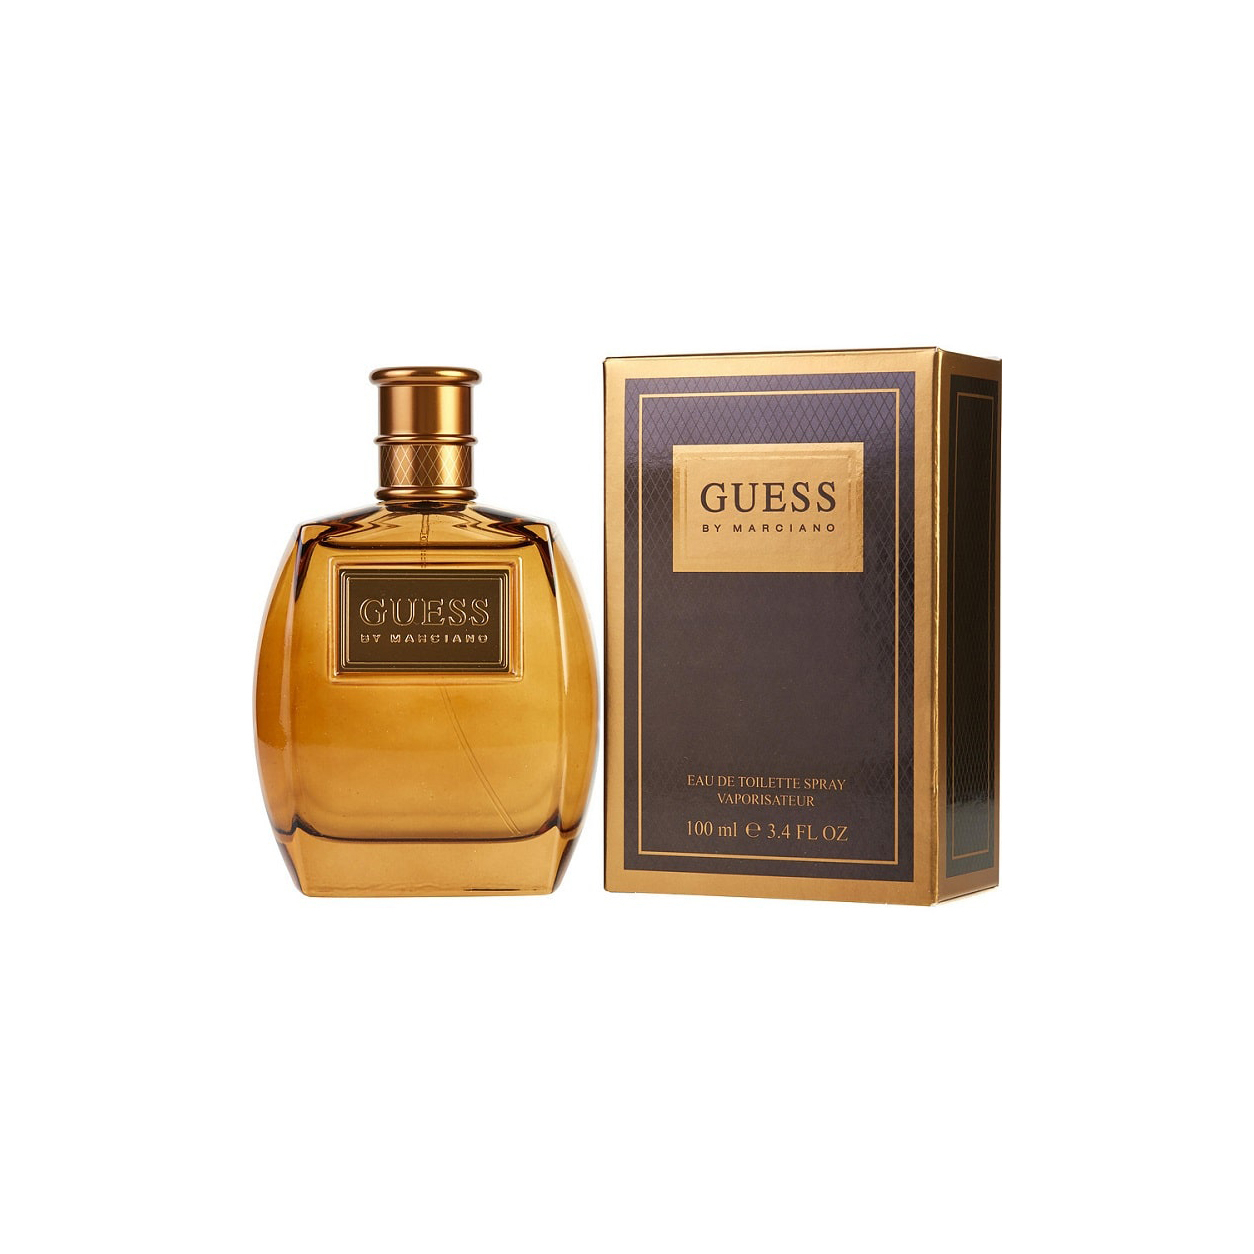 GUESS MARCIANO By GUESS 3.4 OZ EDT SPRAY